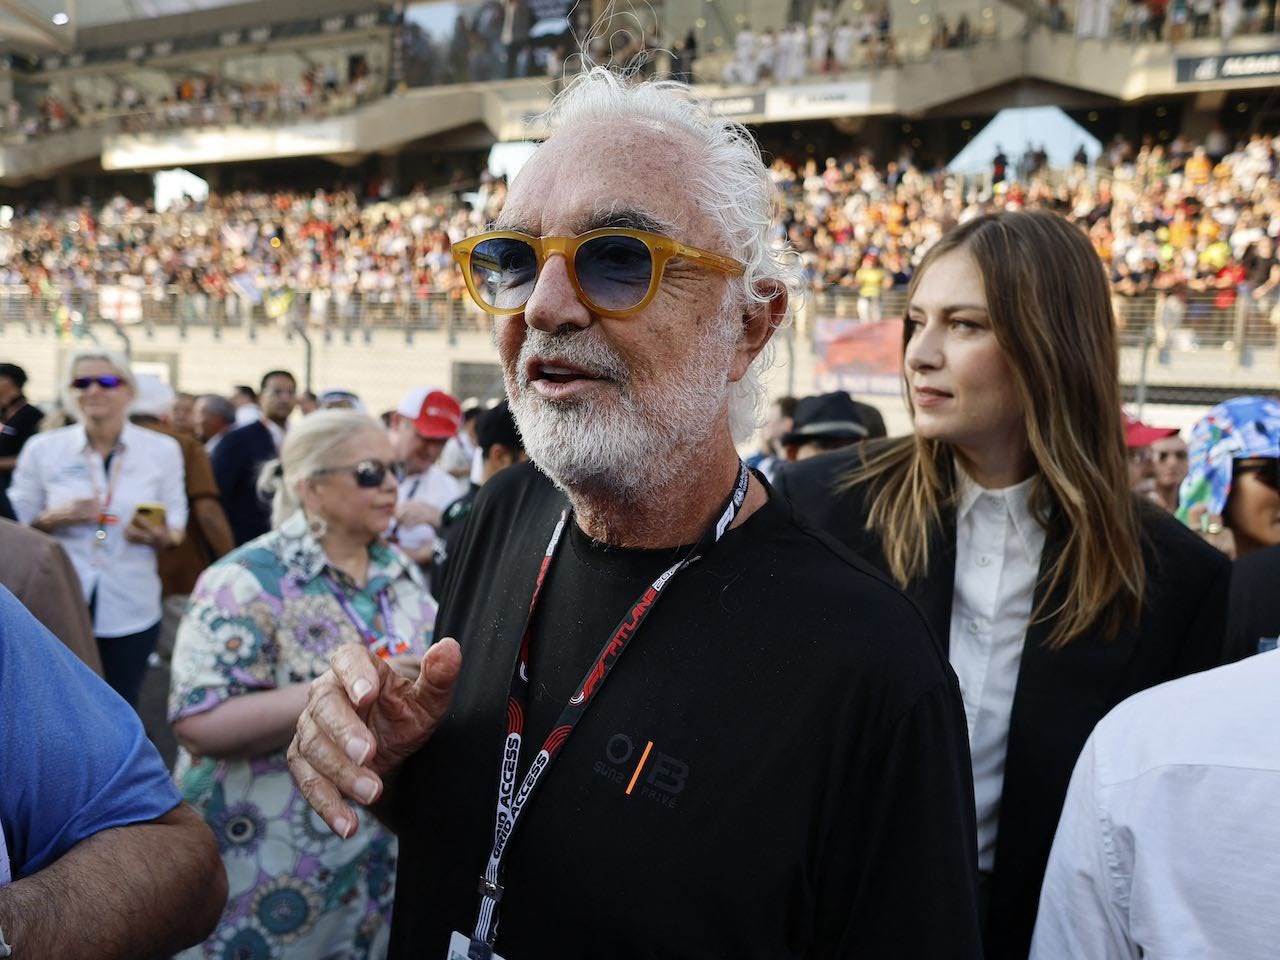 Briatore: No decision yet on 2026 engine project